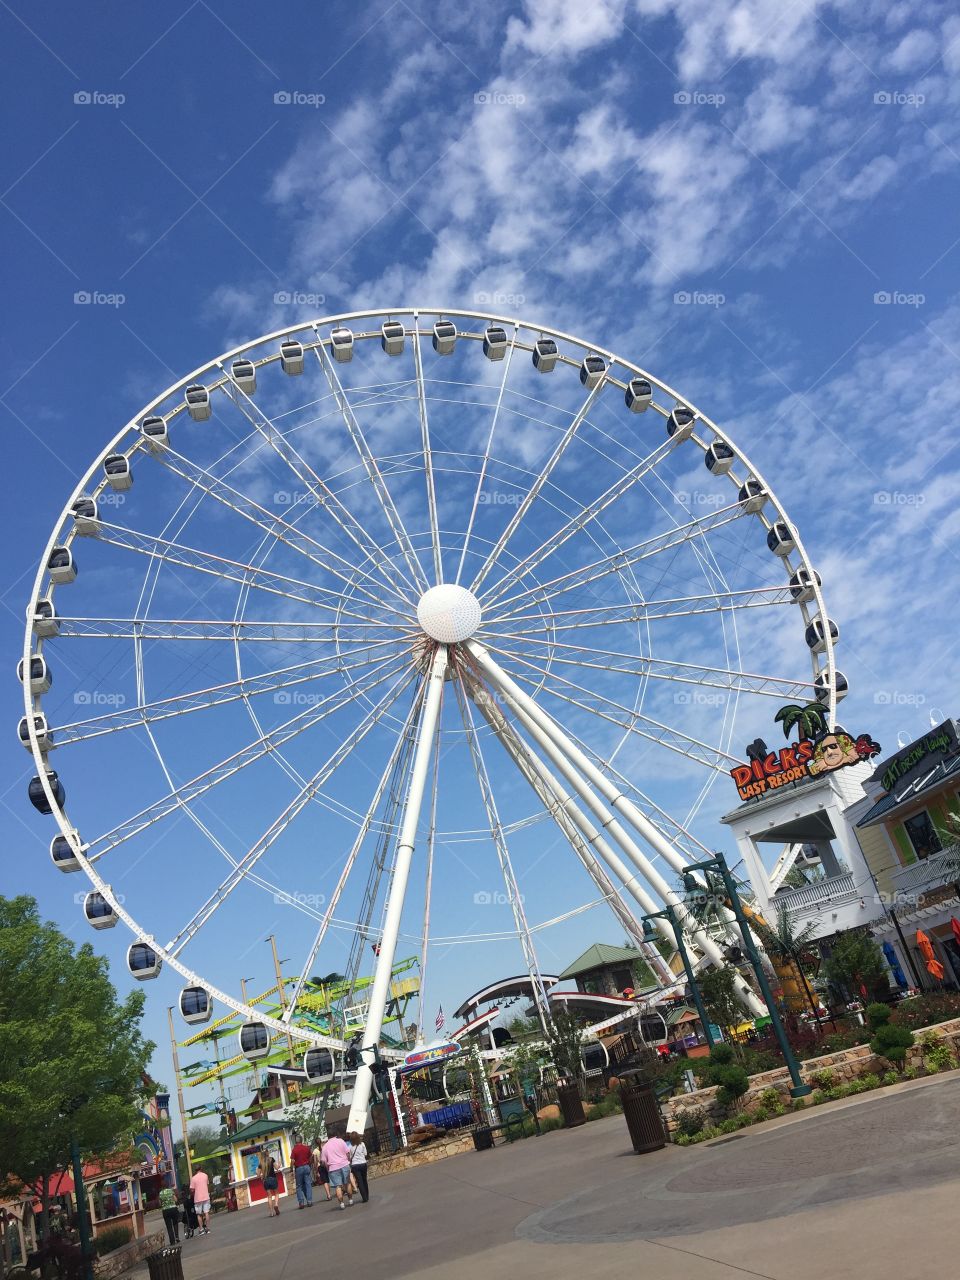 The Wheel - Pigeon Forge